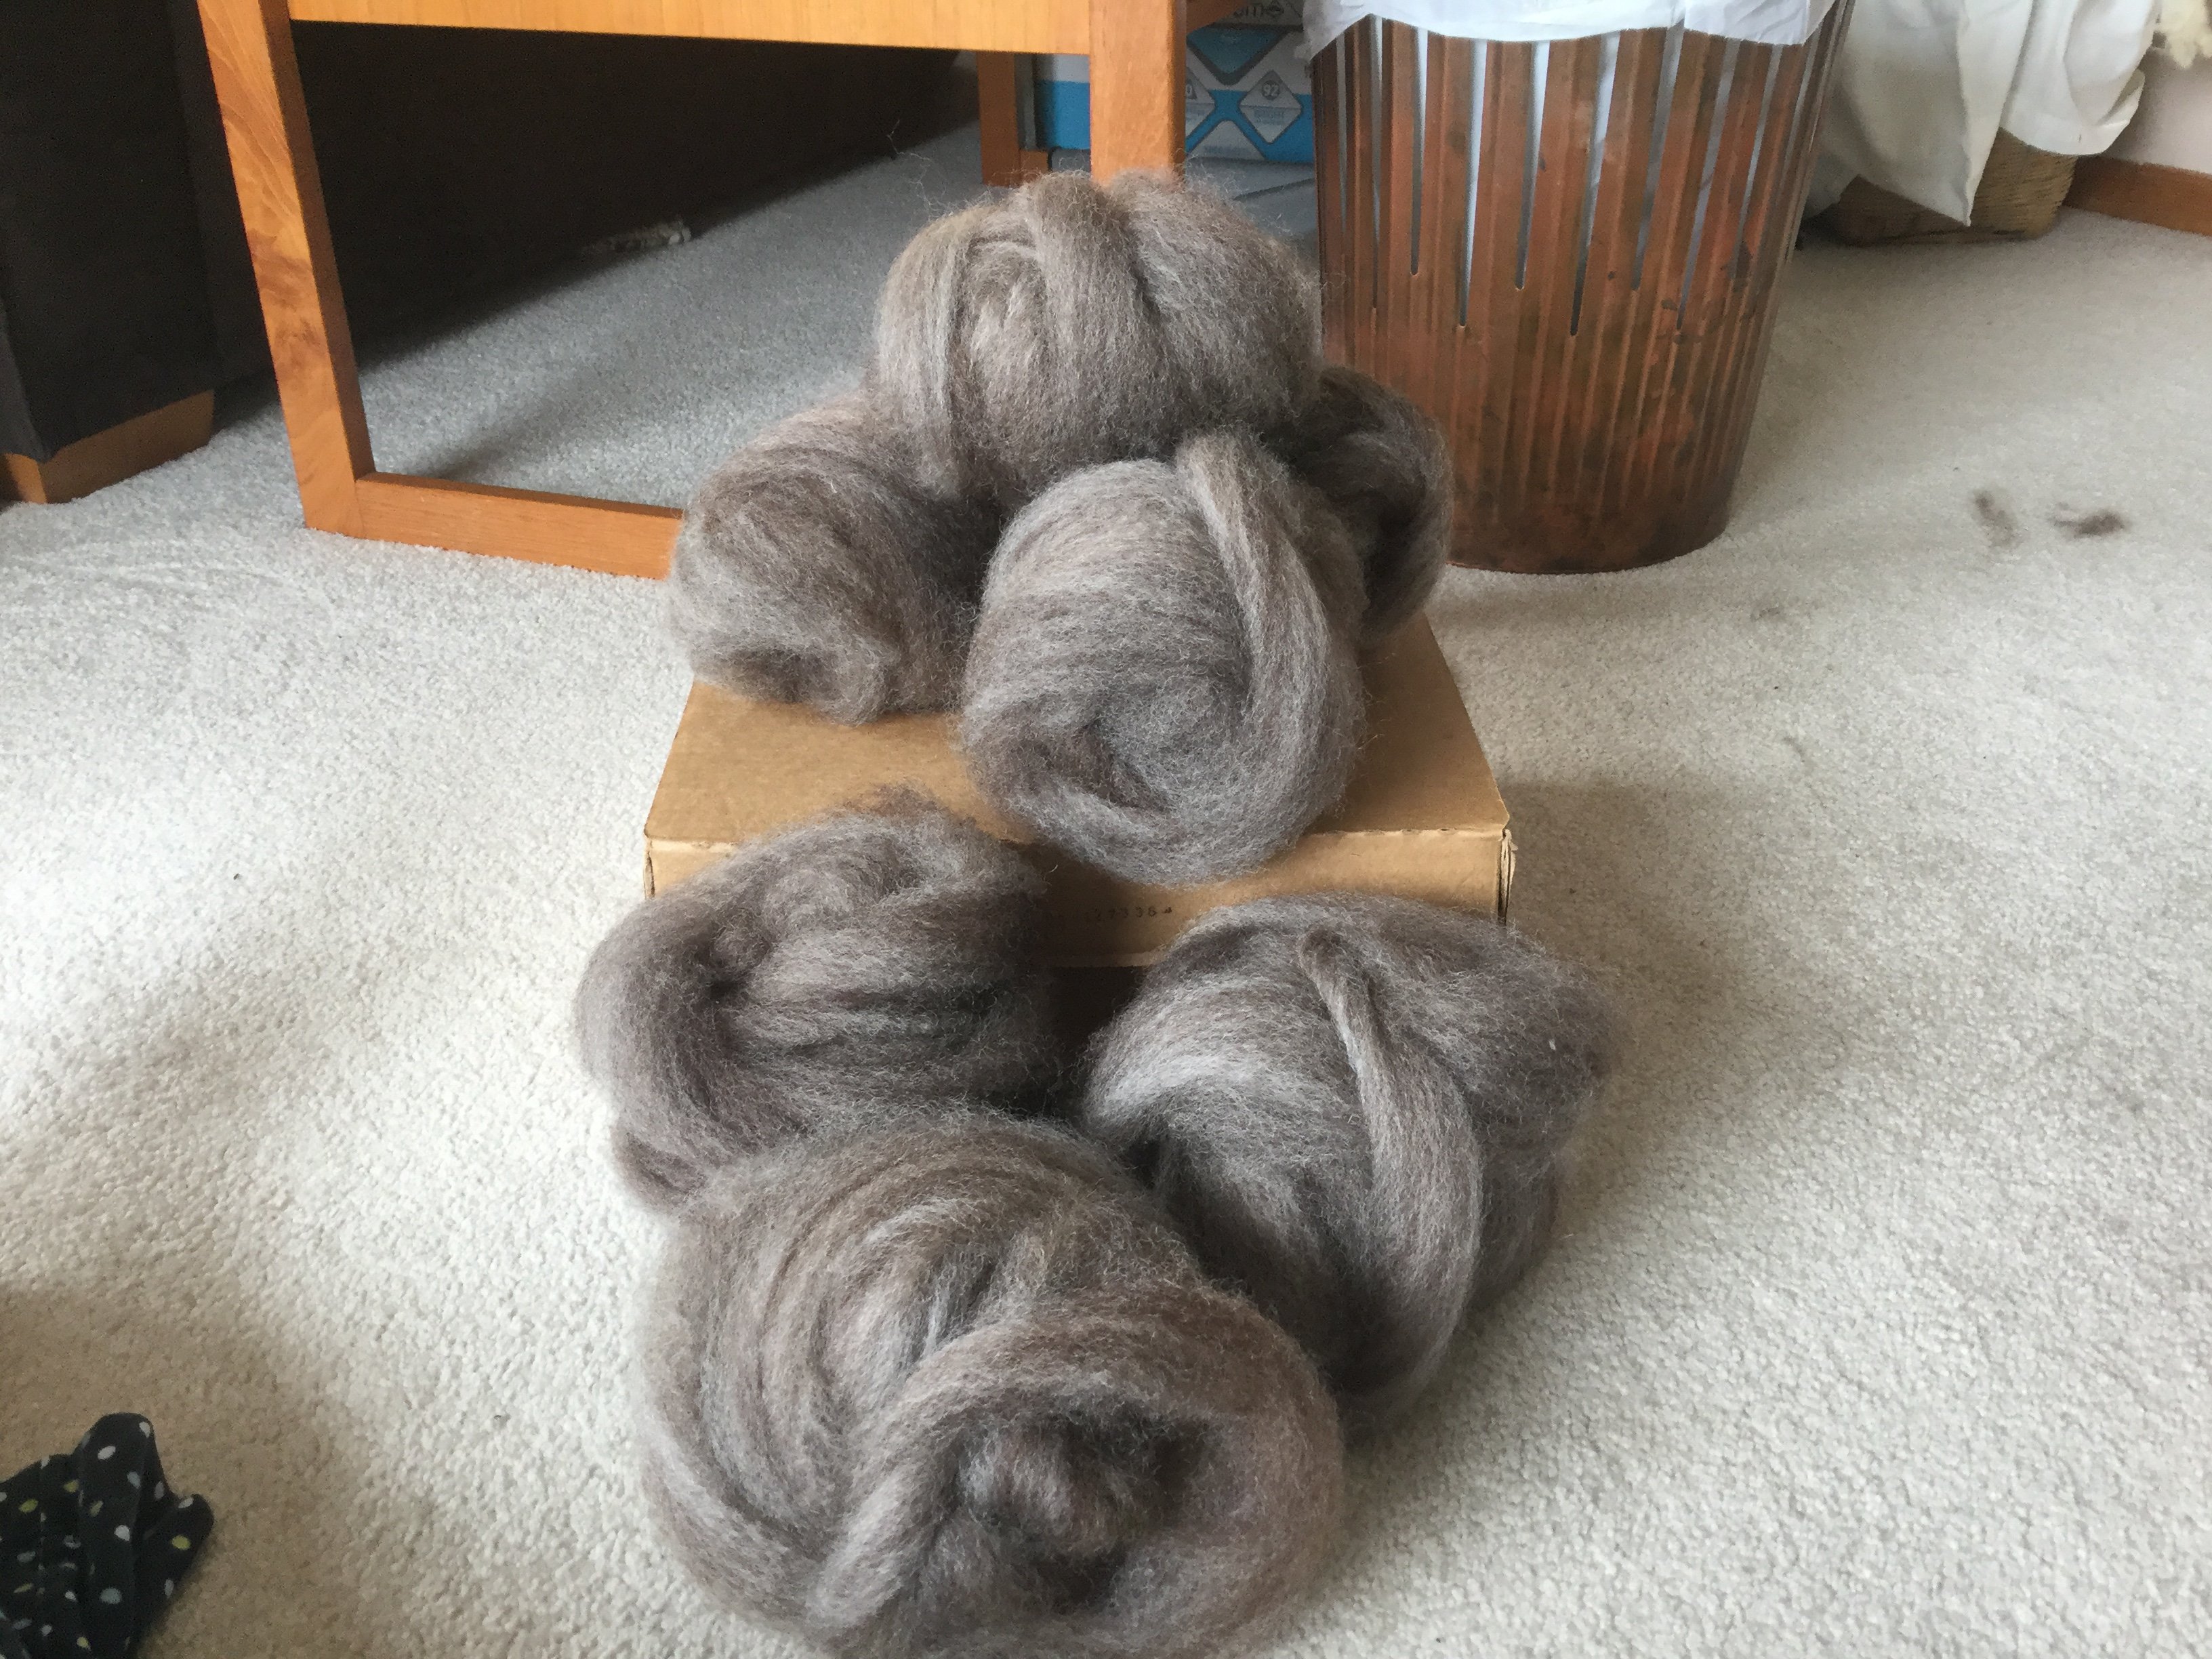 Grace - fibre put through the drum carder tip end first.  The fibre is then dized off to produce a roving.  